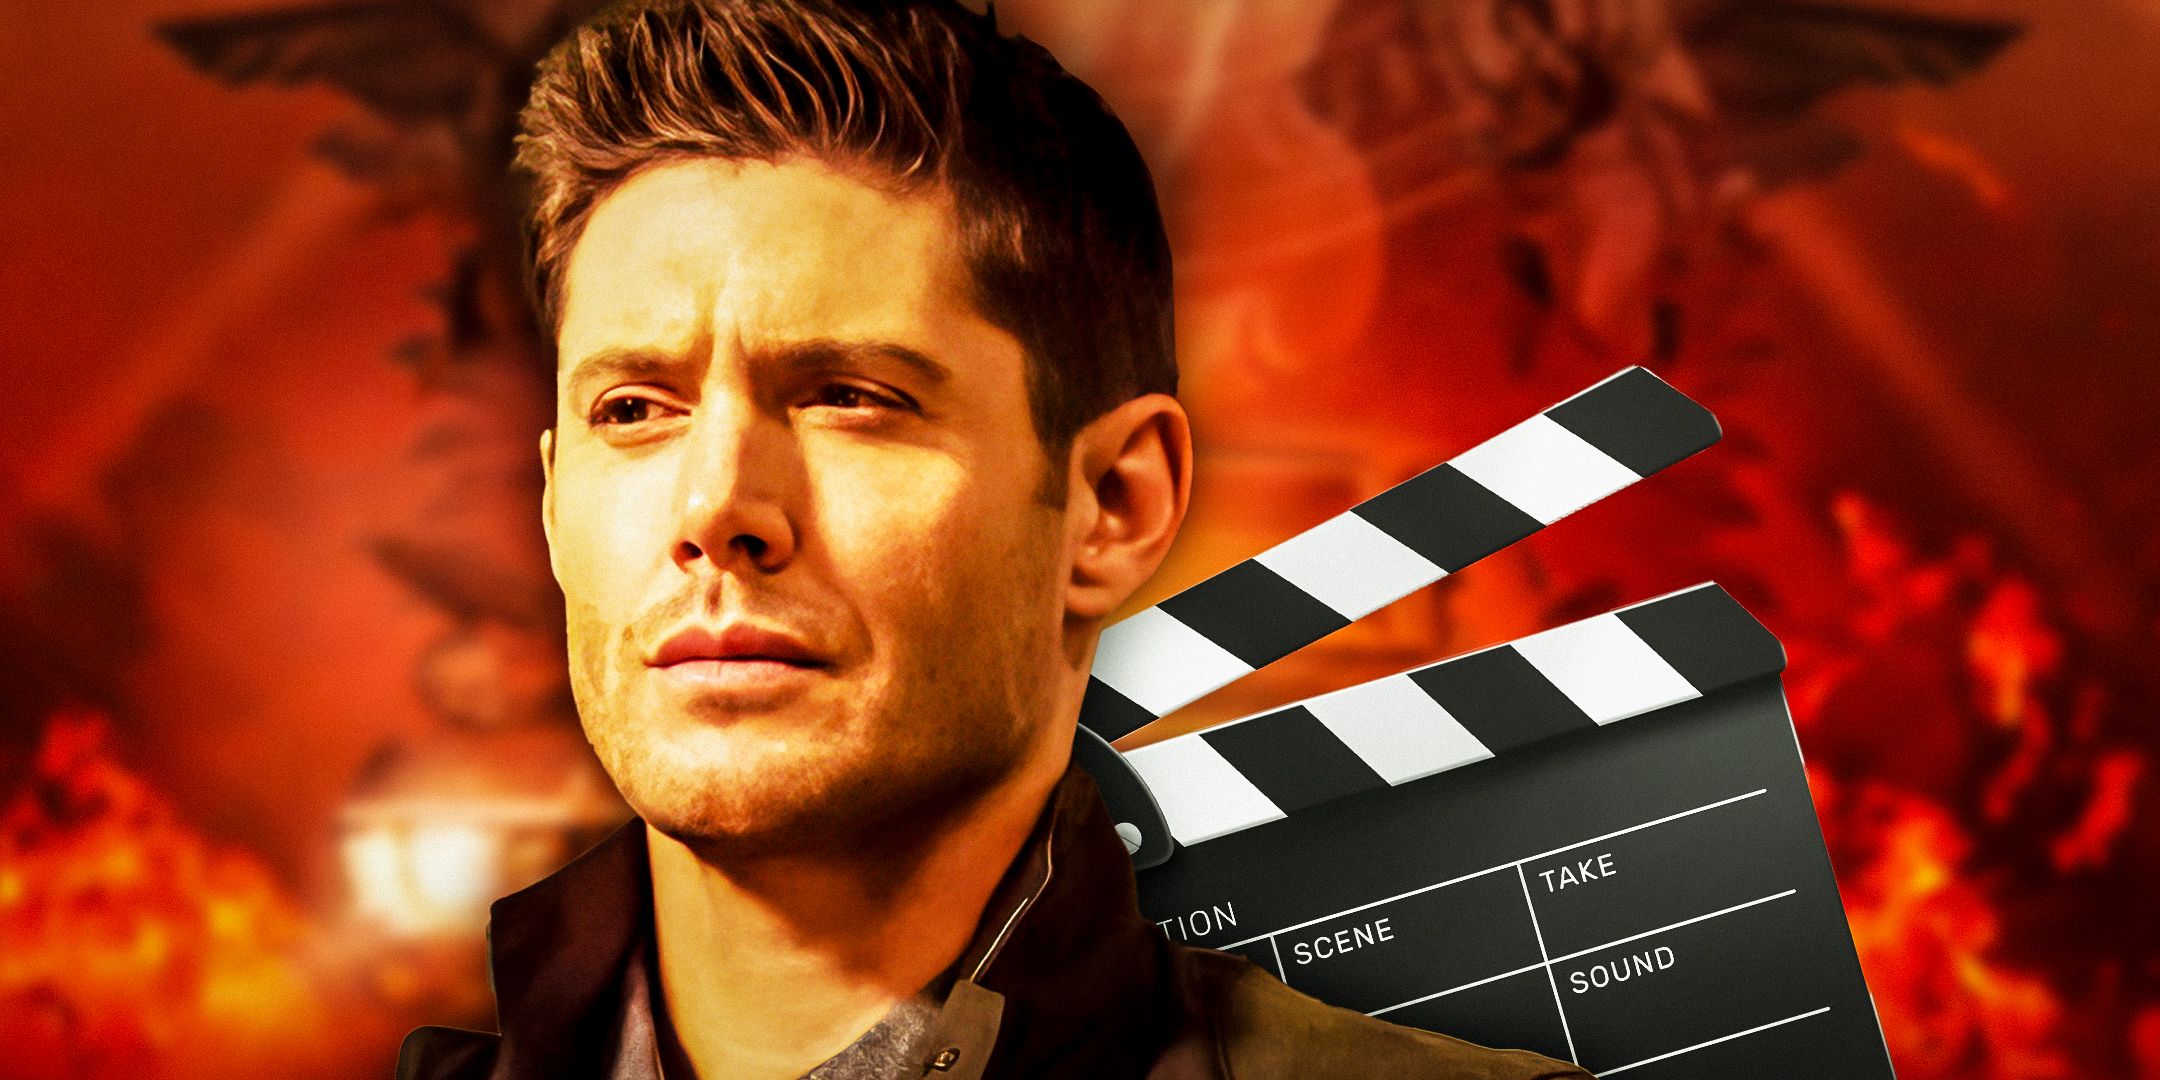 Jensen-Ackles-as-Dean-Winchester-from-Supernatural